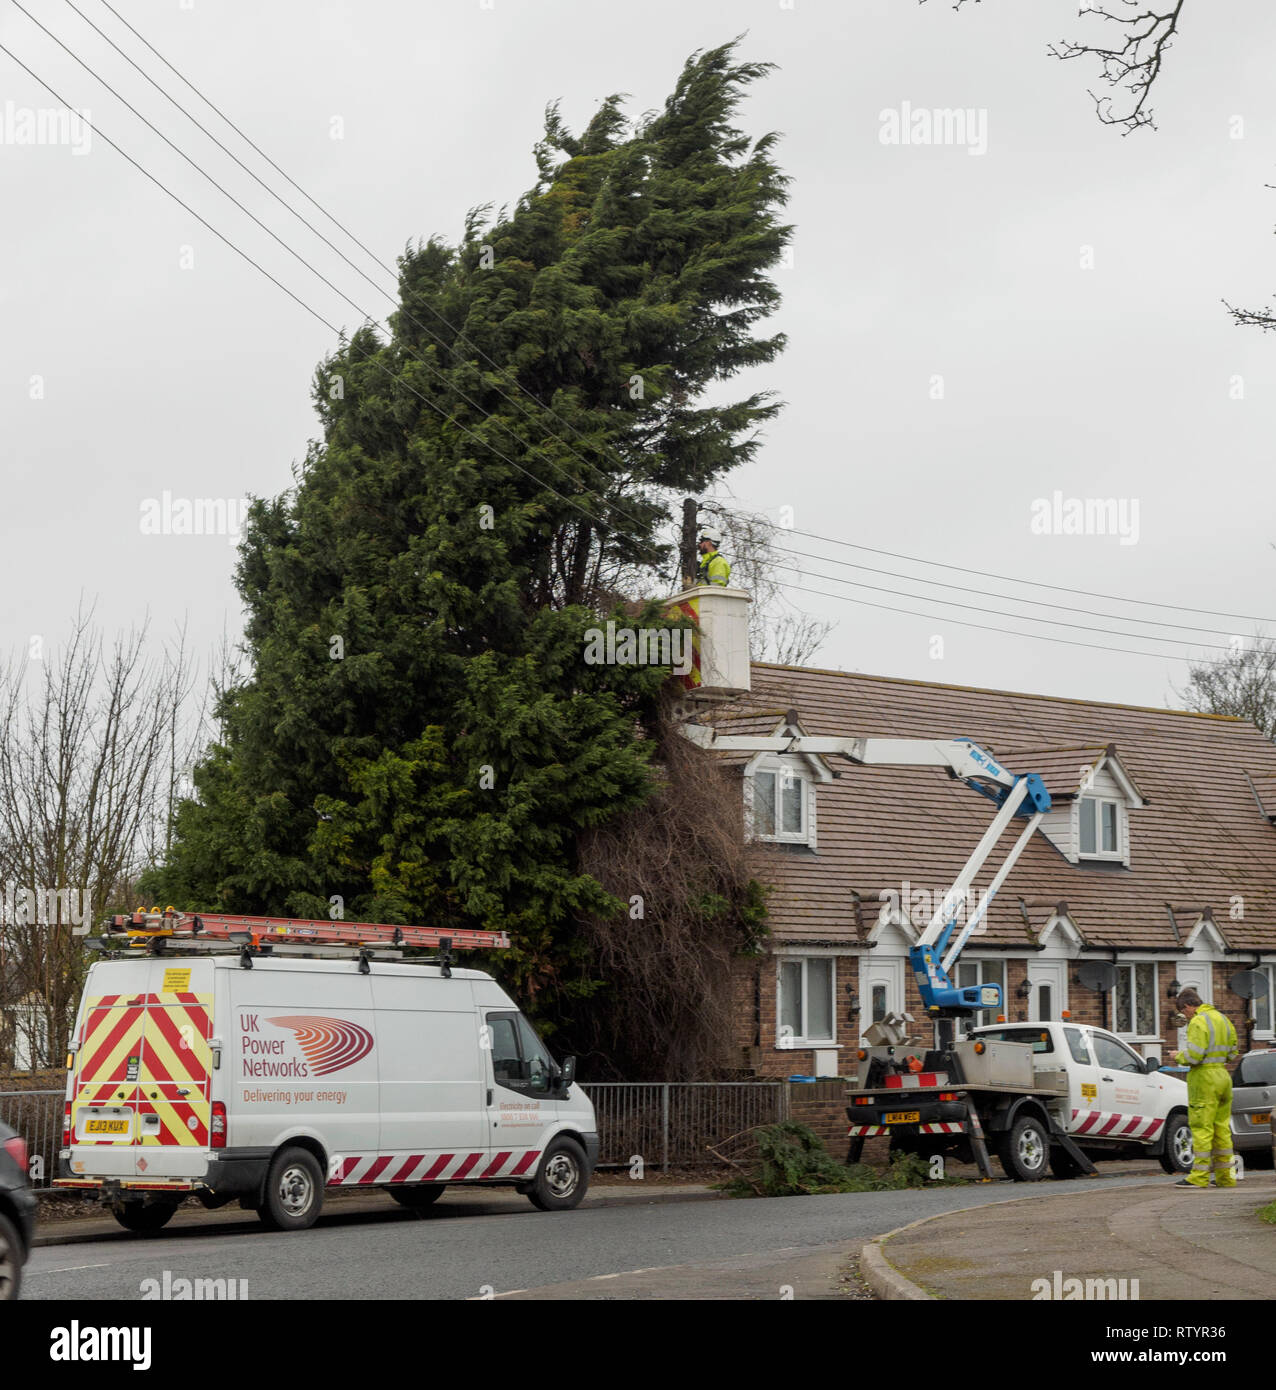 Minster on sea, Kent, UK. 3rd March, 2019. UK Weather: sparks were reportedly seen flying through the air as strong winds caused this tree in Minster on sea, Kent to collide with overhead power lines. UK Power Networks arrived quickly at the scene to deal with the incident. Credit: James Bell/Alamy Live News Stock Photo